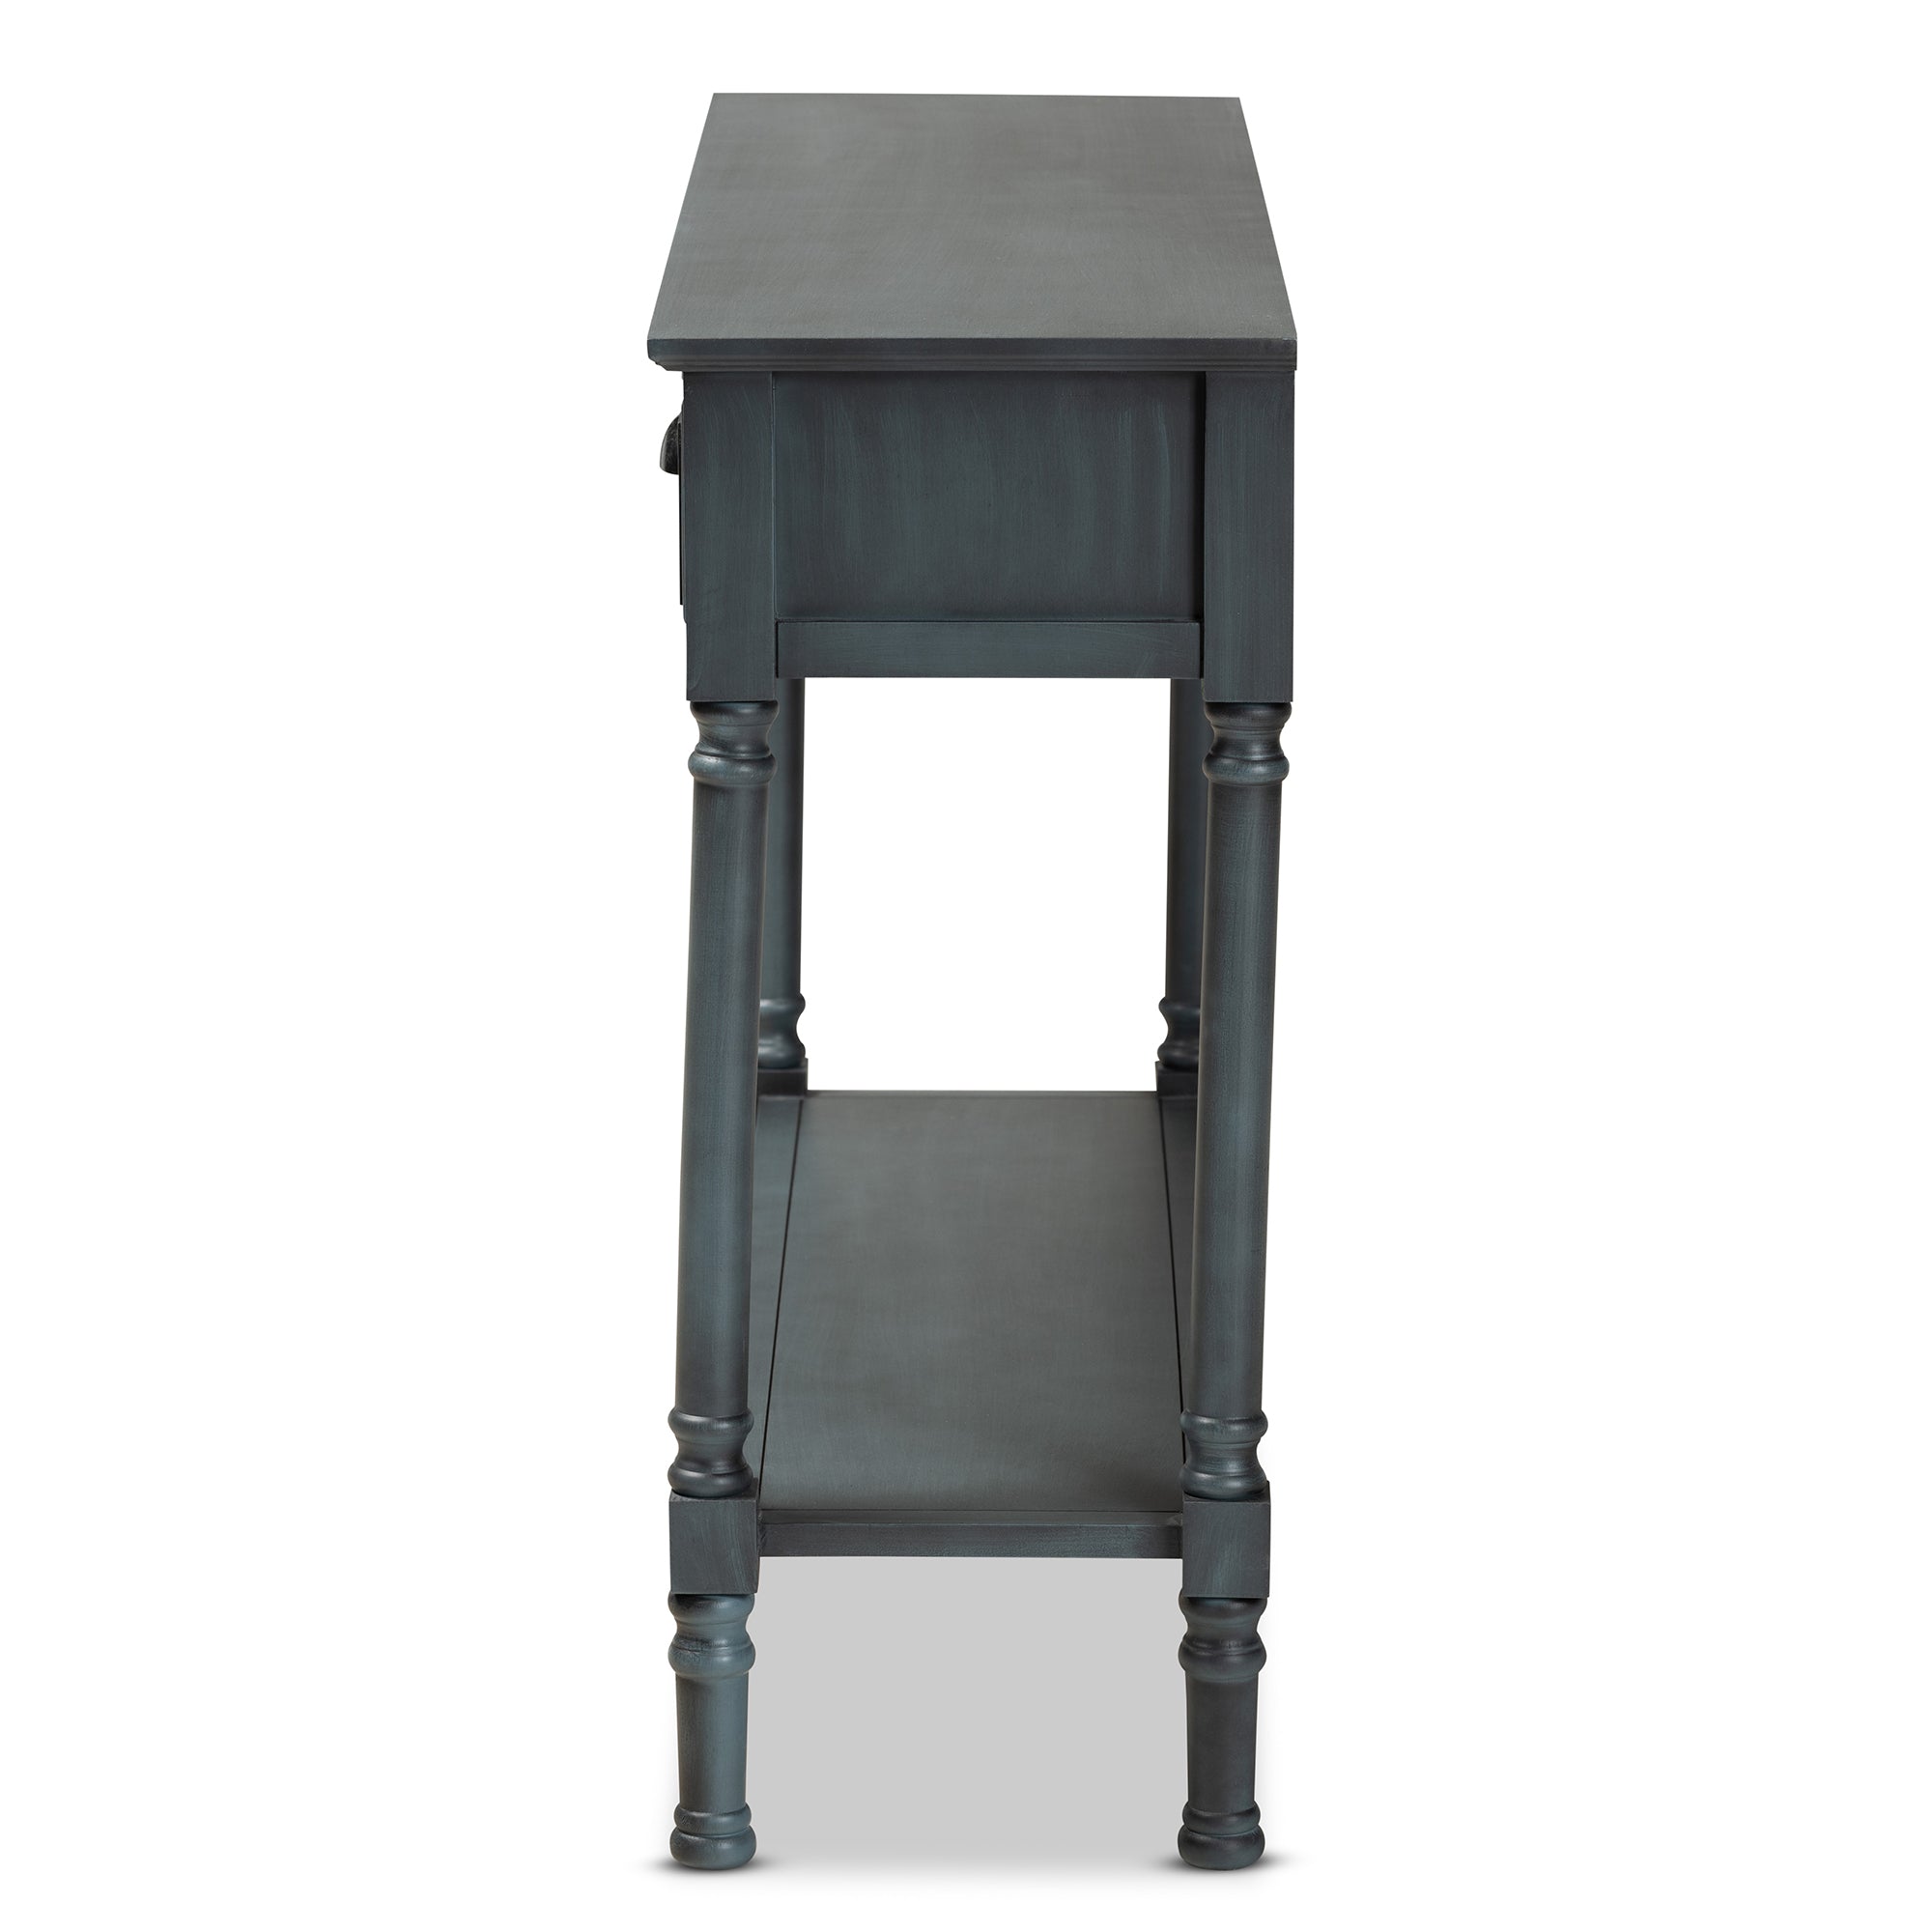 Garvey French Provincial Console Table 3-Drawer-Console Table-Baxton Studio - WI-Wall2Wall Furnishings